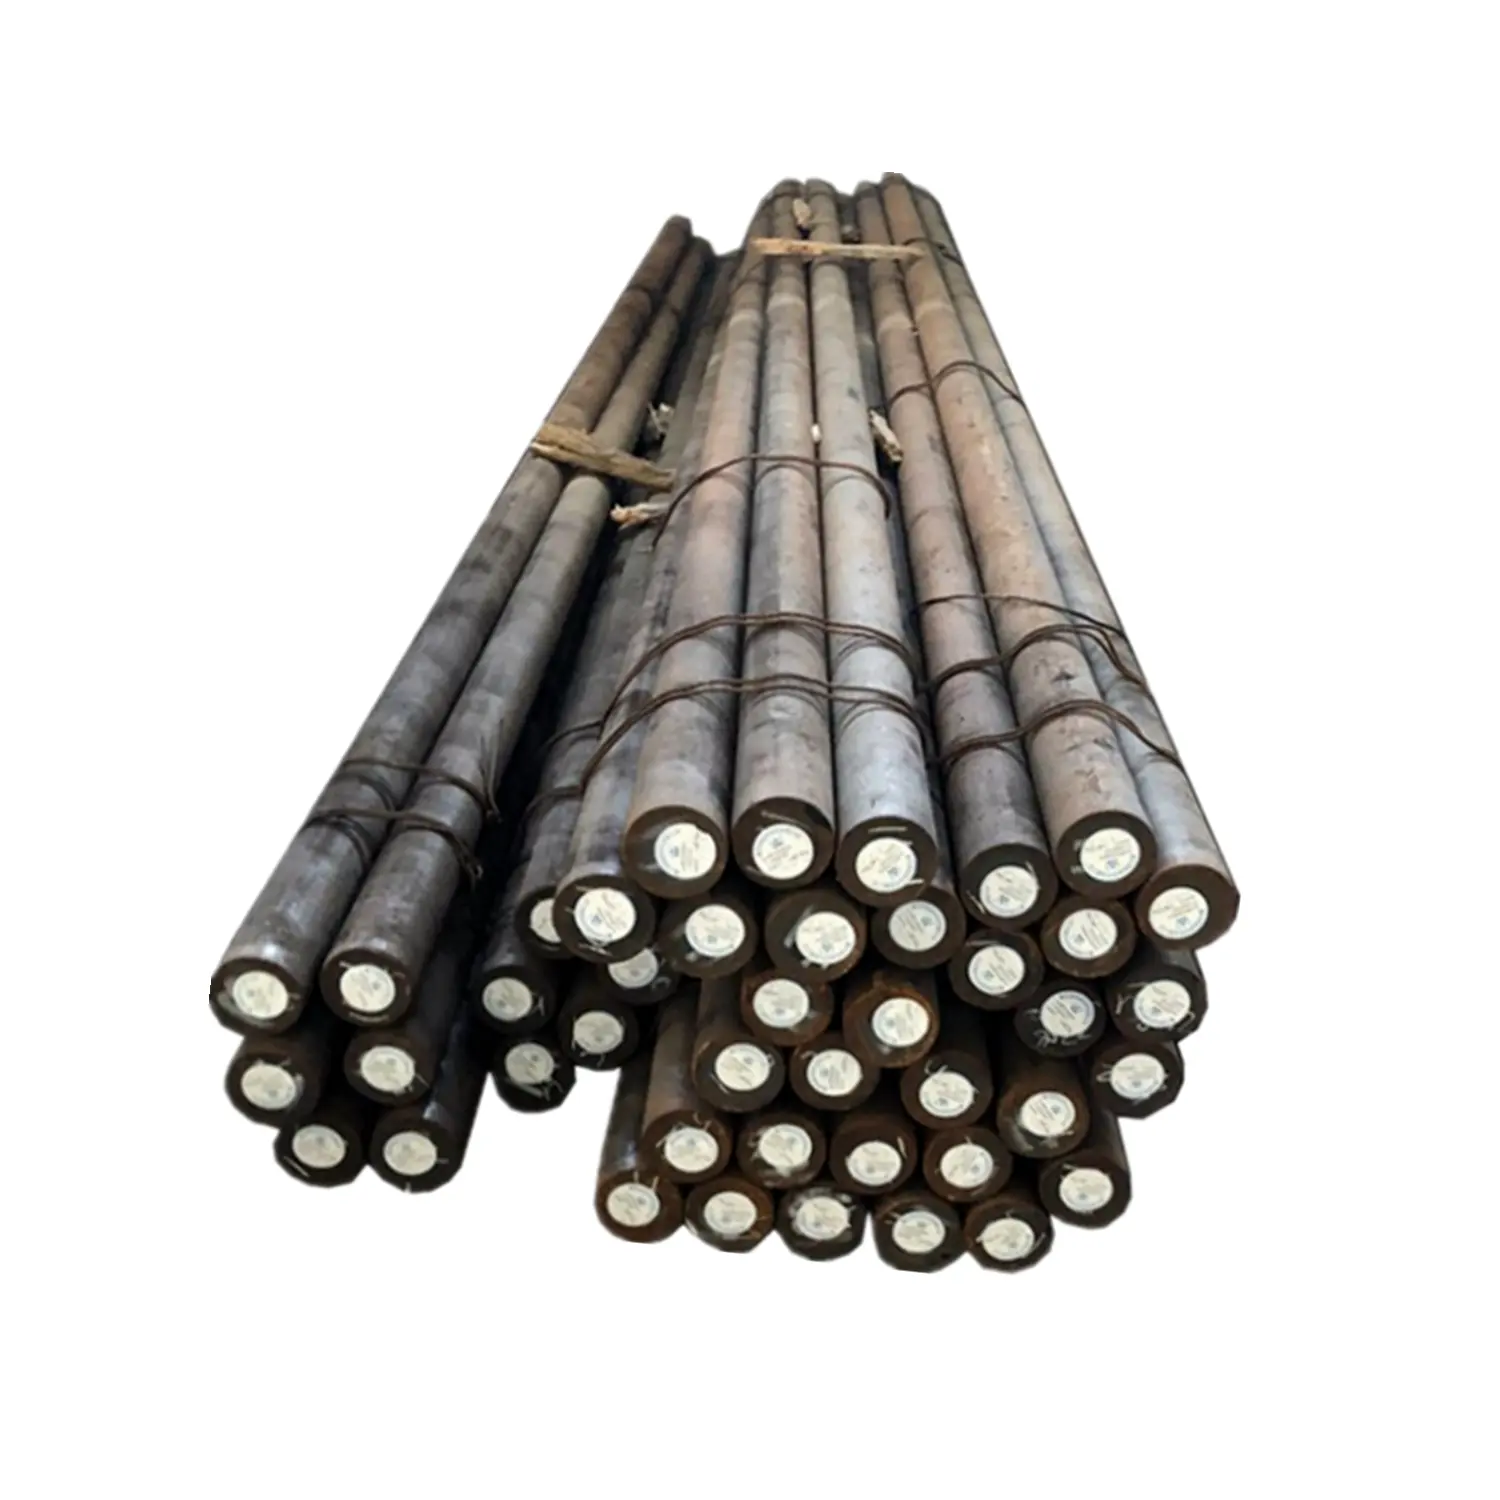 Cold drawn custom diameter 12mm carbon steel round bars for structural